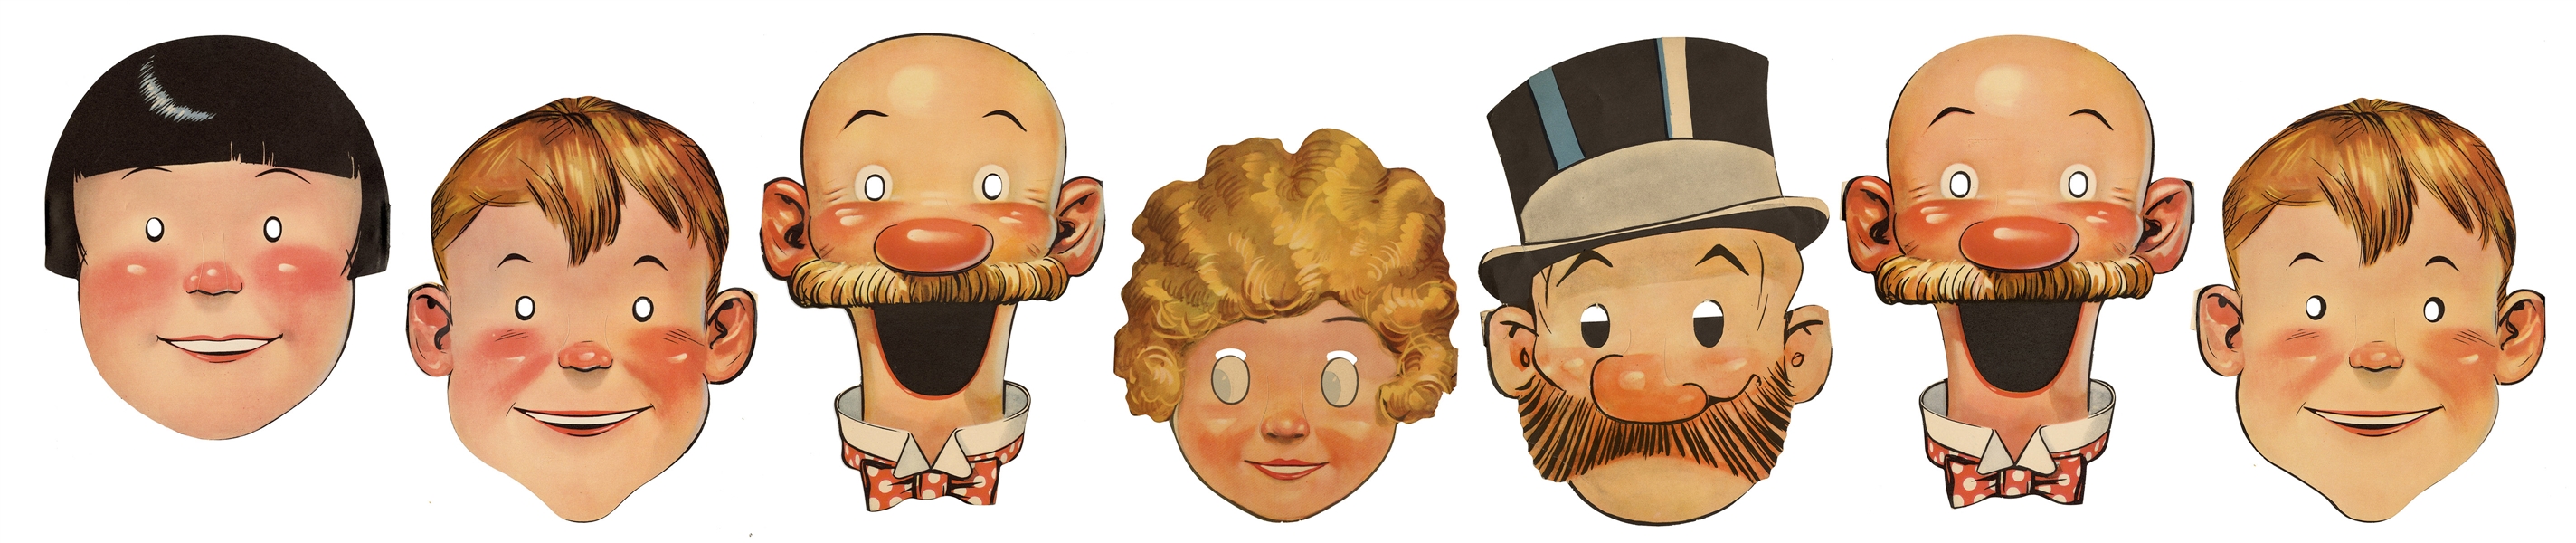  Orphan Annie, Andy Gump, and Other Paper Masks and Ads. Inc...